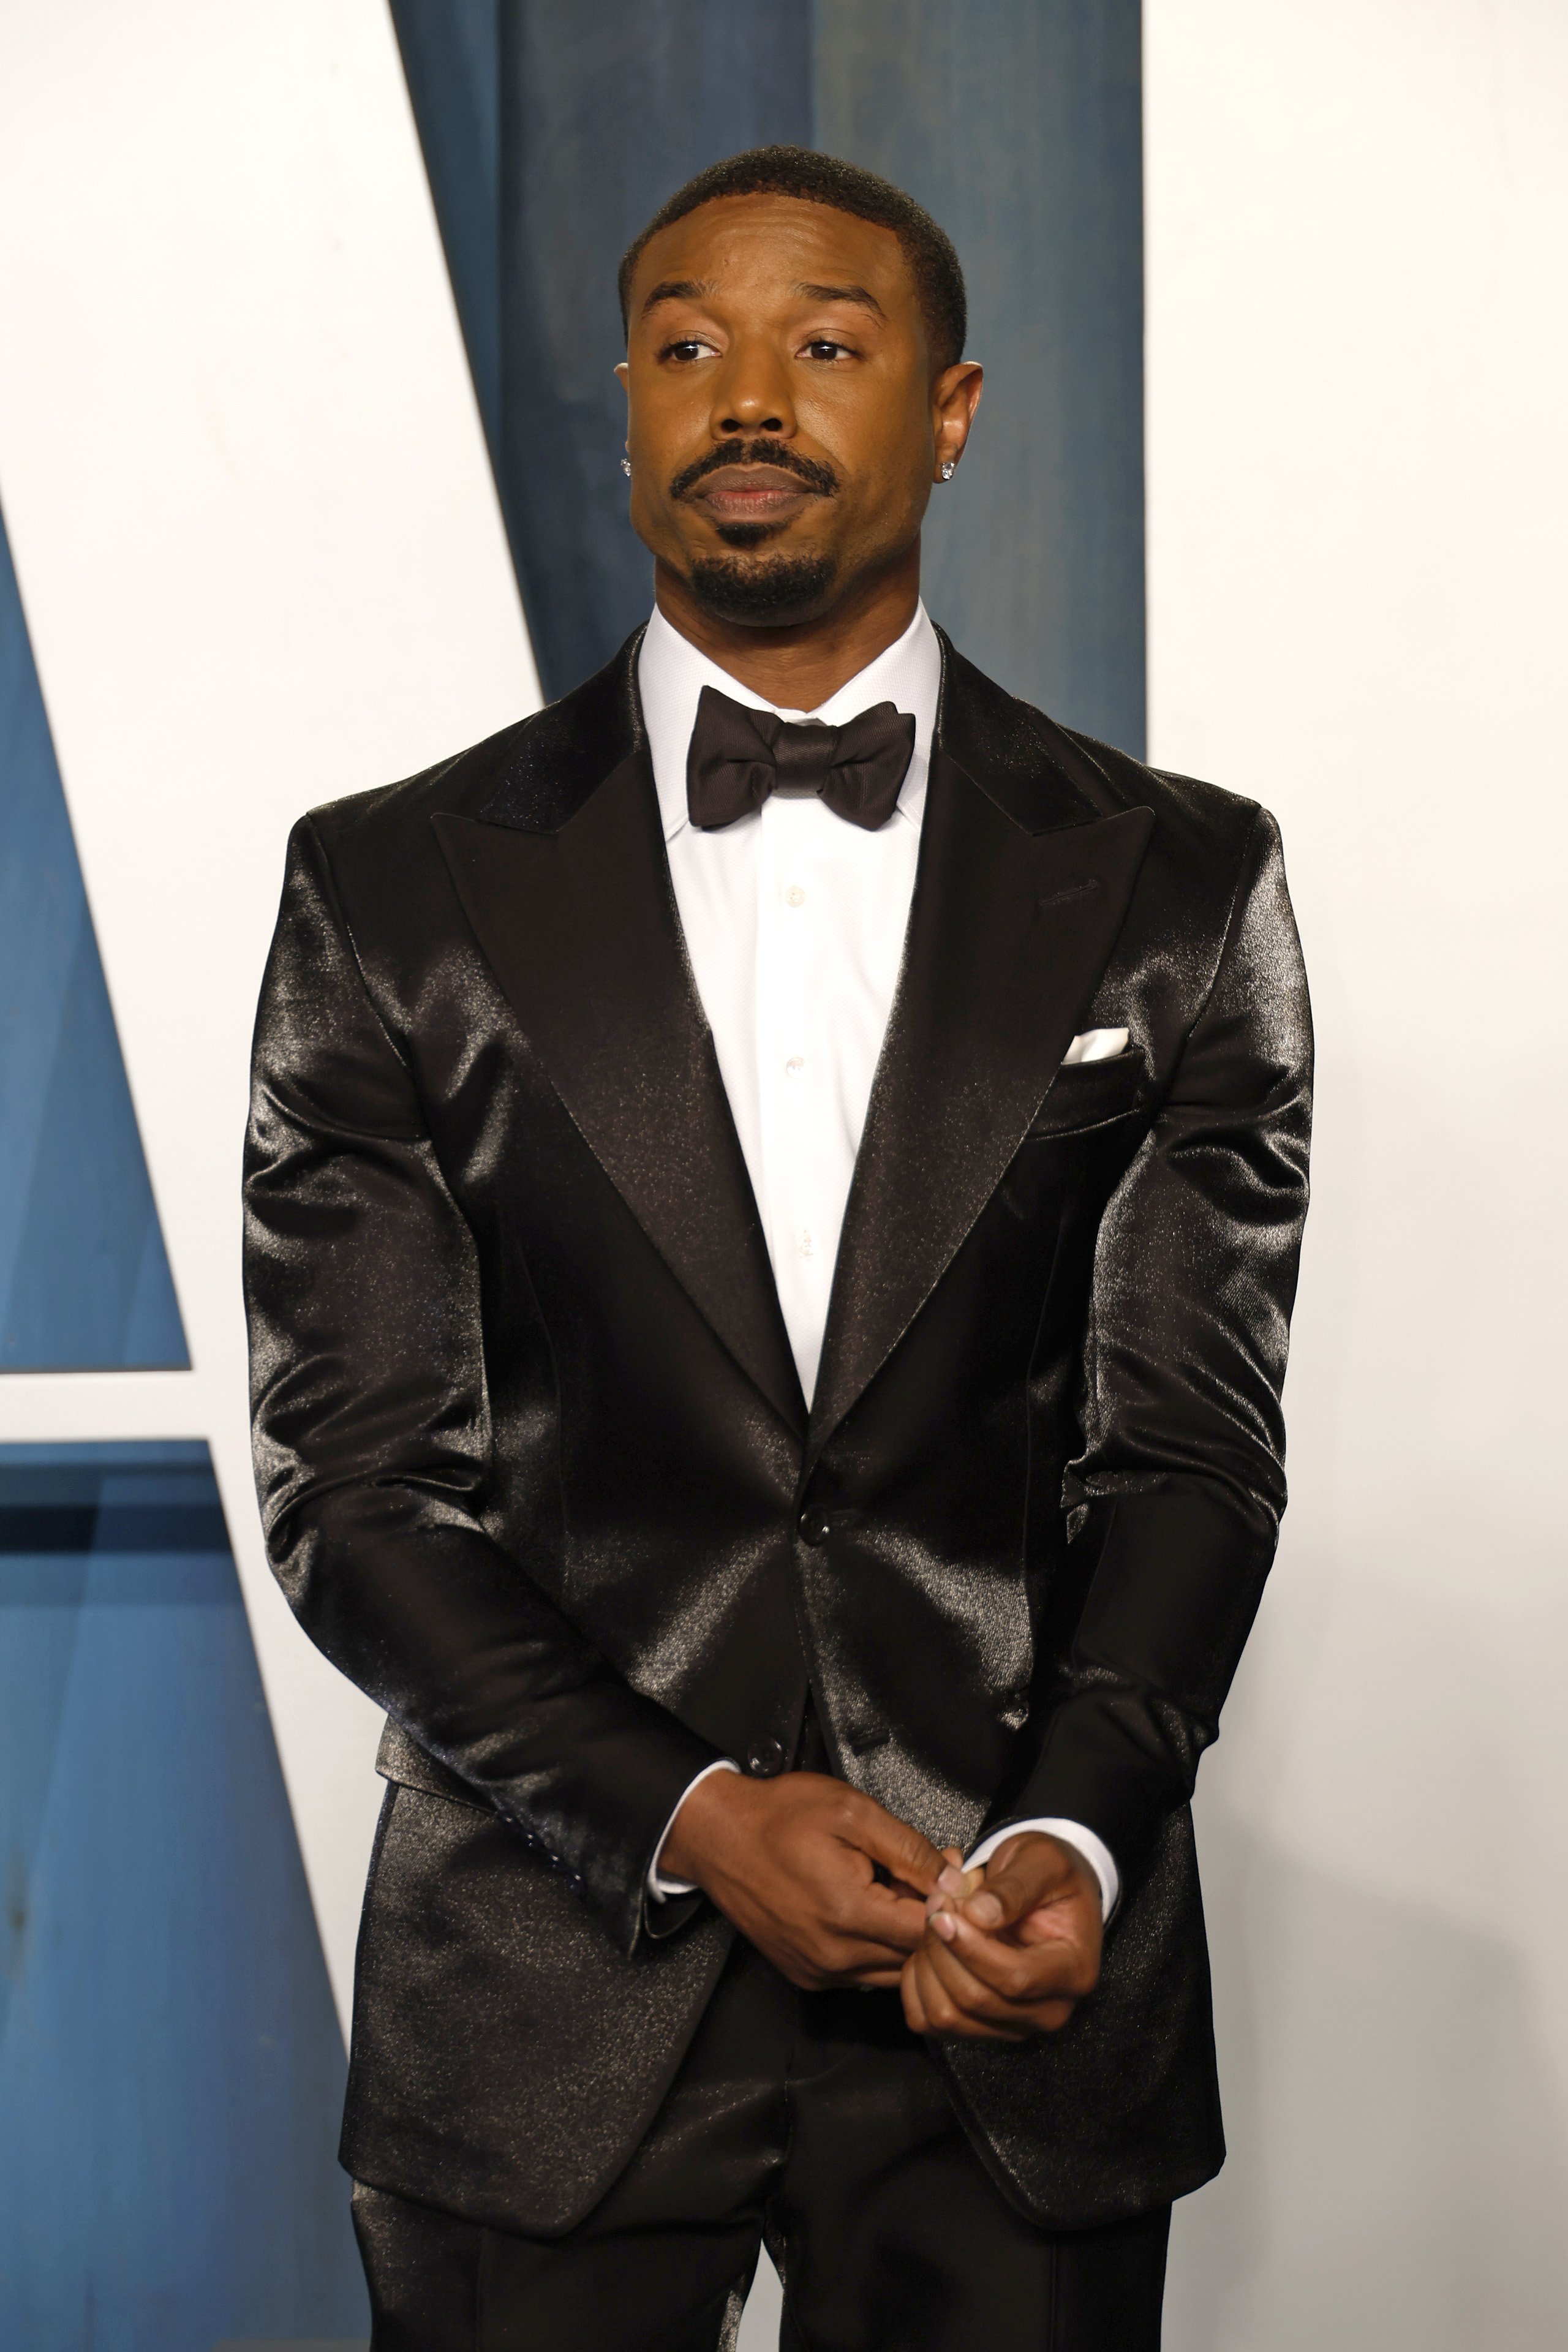 Michael B. Jordan attends the 2022 Vanity Fair Oscar Party hosted by Radhika Jones at Wallis Annenberg Center for the Performing Arts on March 27, 2022 in Beverly Hills, California. | Source: Getty Images